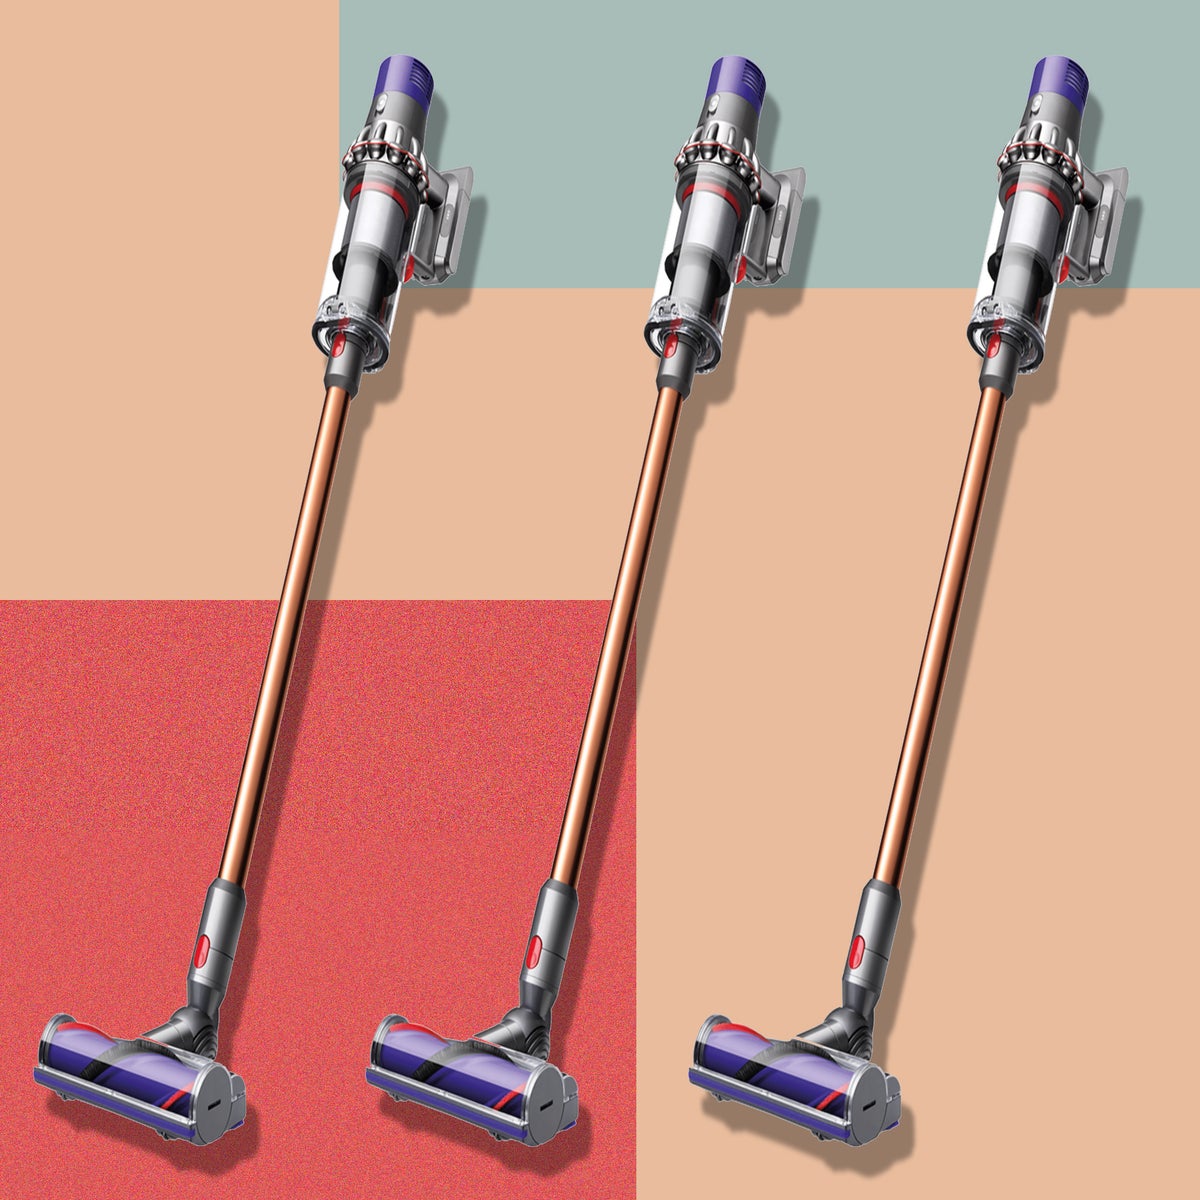 https://static.independent.co.uk/2021/08/31/10/Dyson%20IndyBest.jpg?width=1200&height=1200&fit=crop